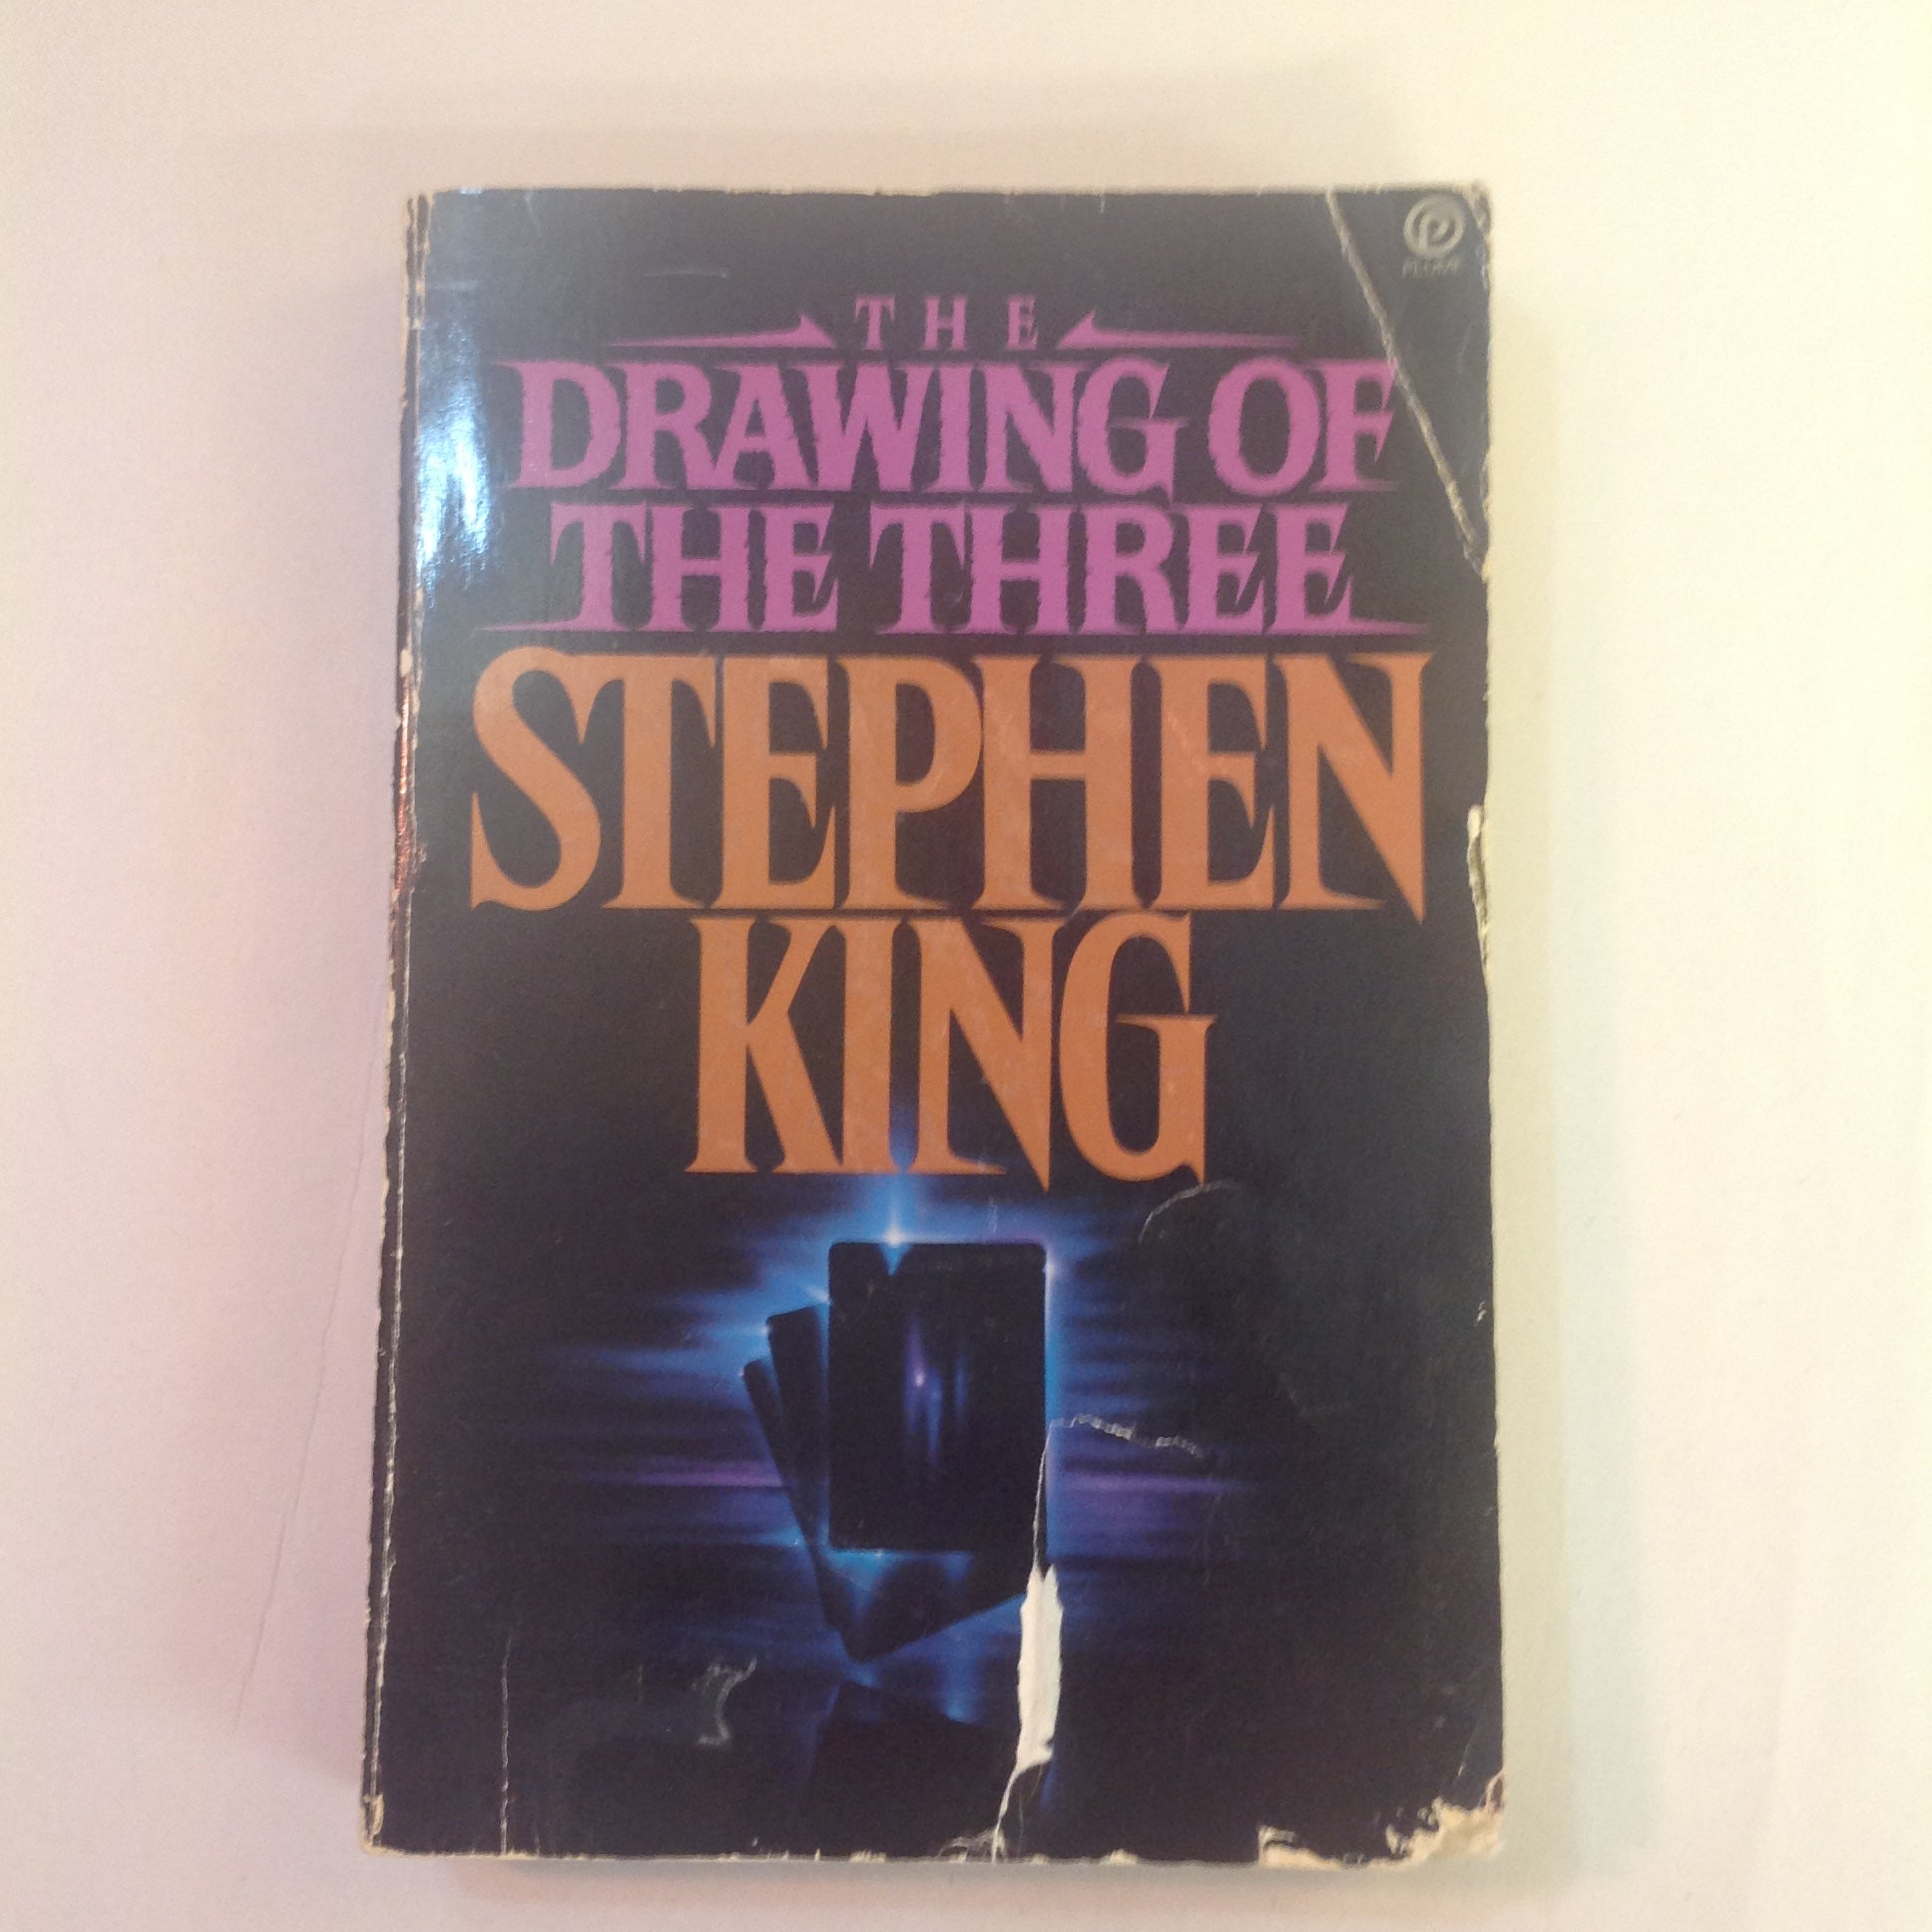 Vintage 1987 Trade Paperback The Dark Tower II: The Drawing of the Three Stephen King